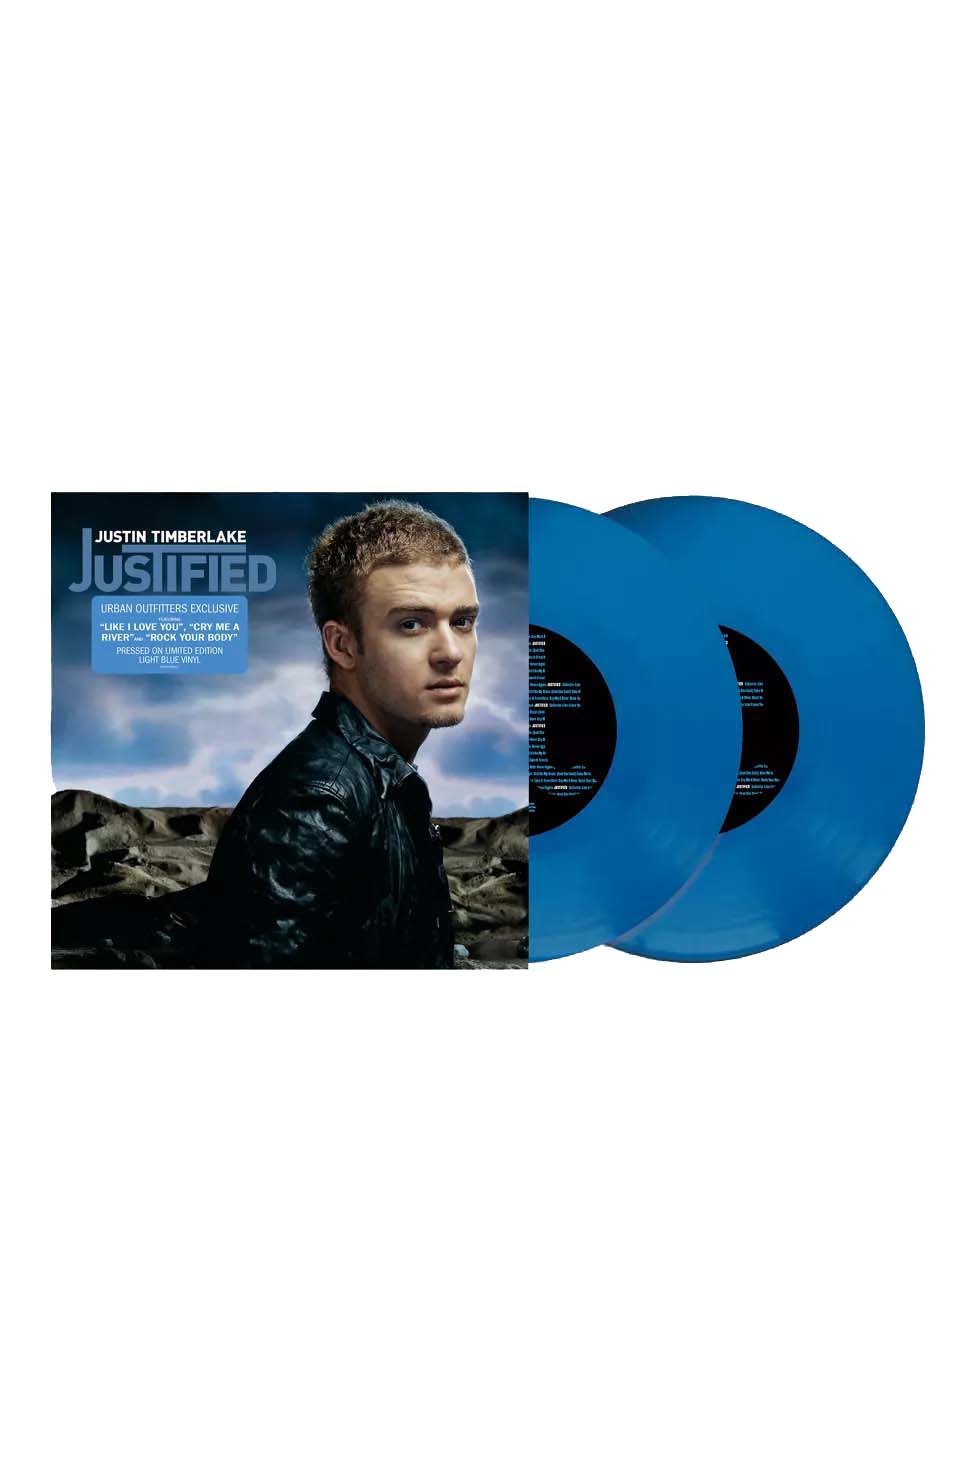 Justin Timberlake Justified Urban Outfitters Exclusive 2XLP Vinyl 